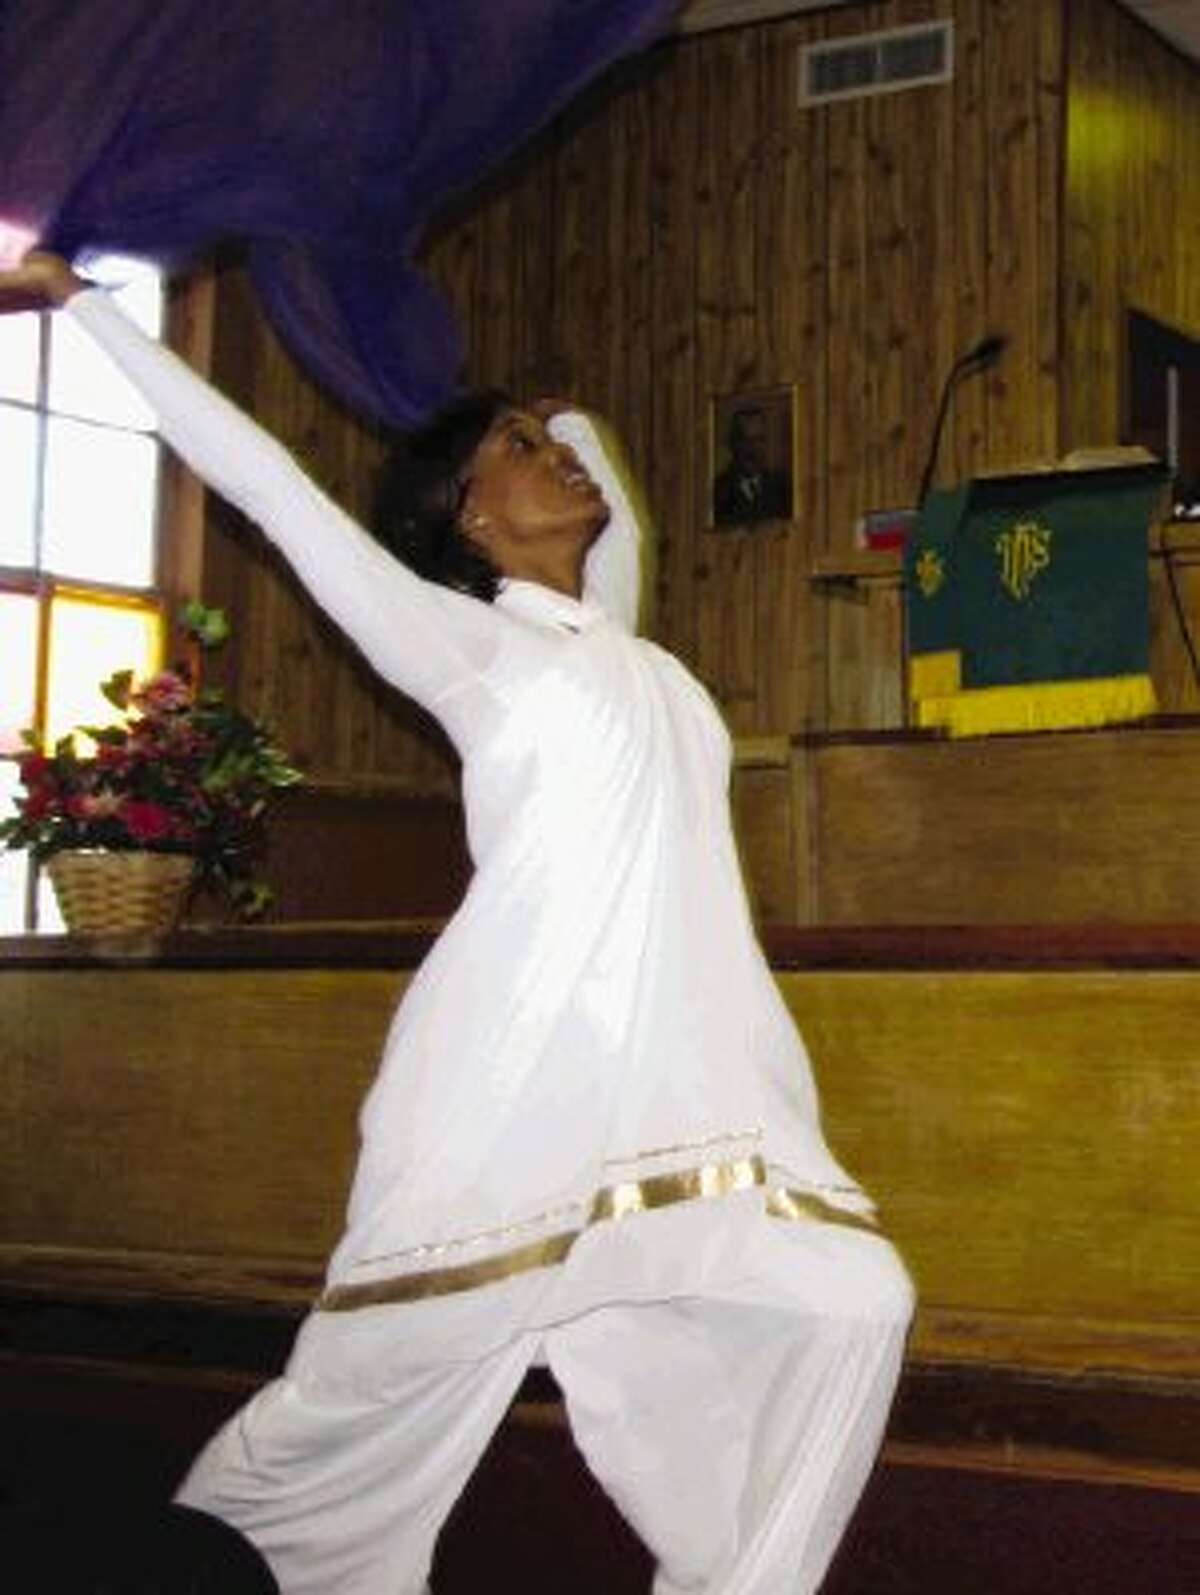 A dancer with Thomas Chapel United Methodist Church’s High Praise Ministry performed a Liturgical Dance at the chapel’s 145th anniversary Sunday.